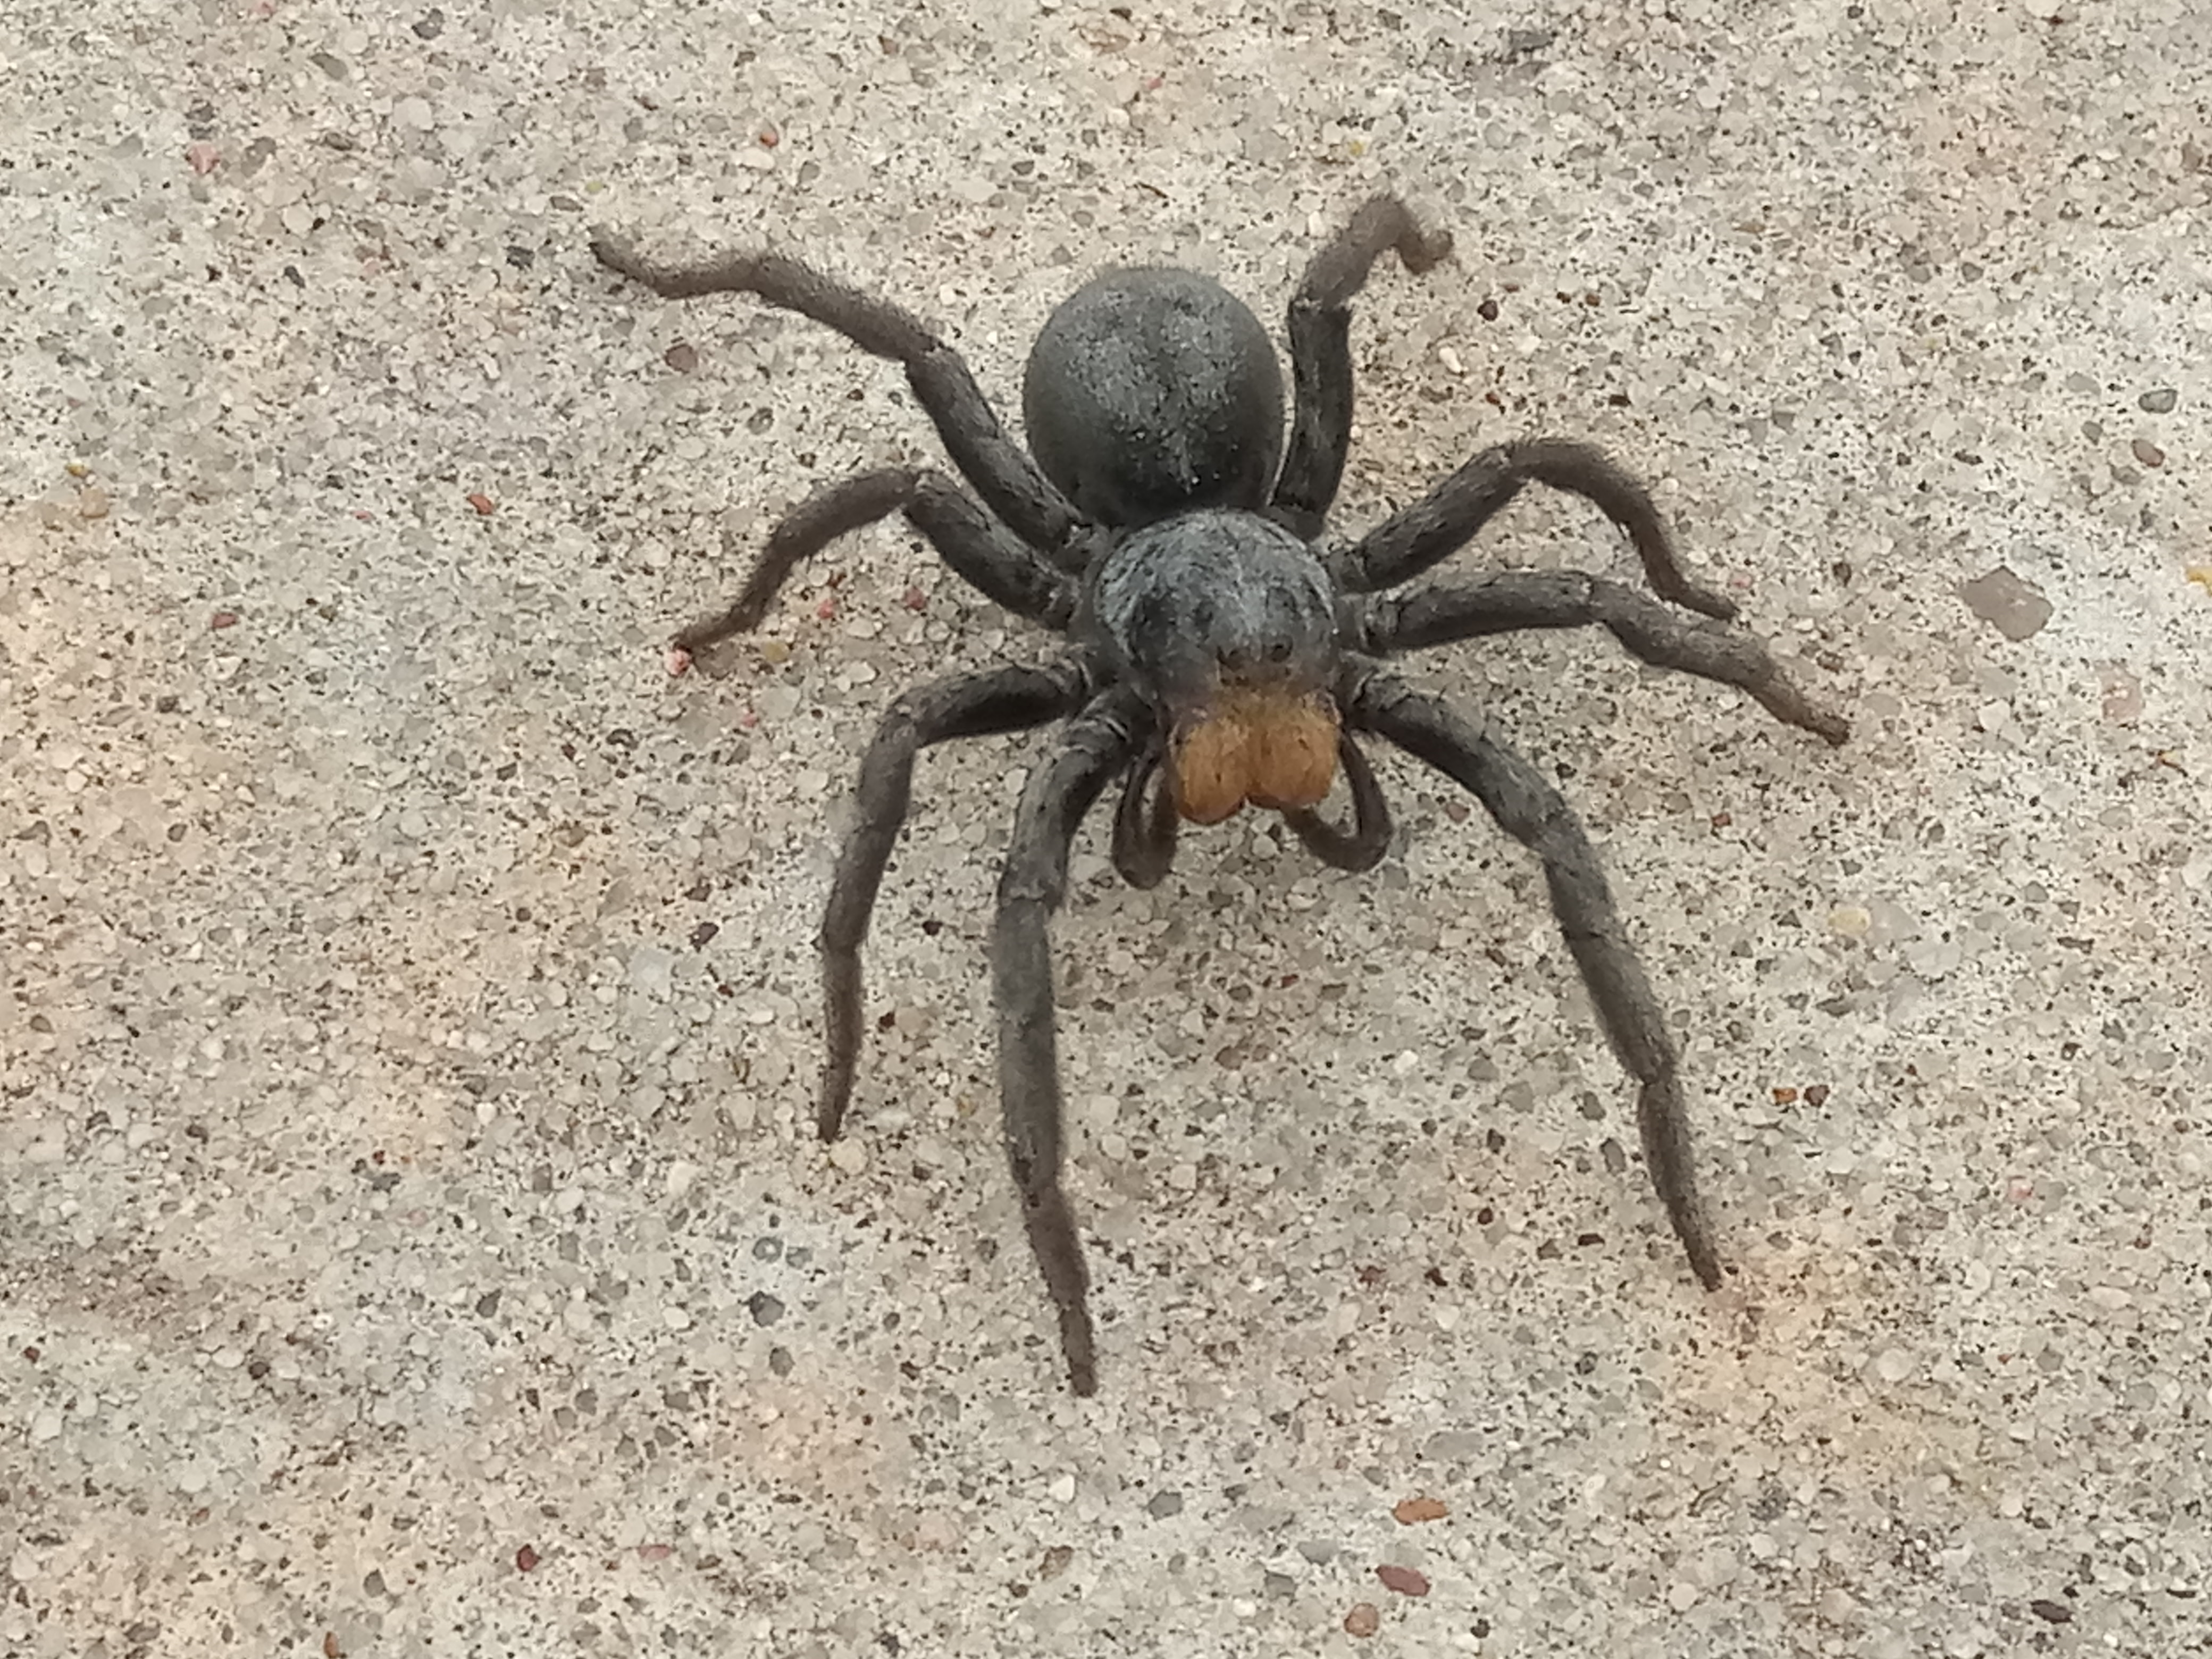 Picture of Geolycosa (Burrowing Wolf Spiders) - Dorsal